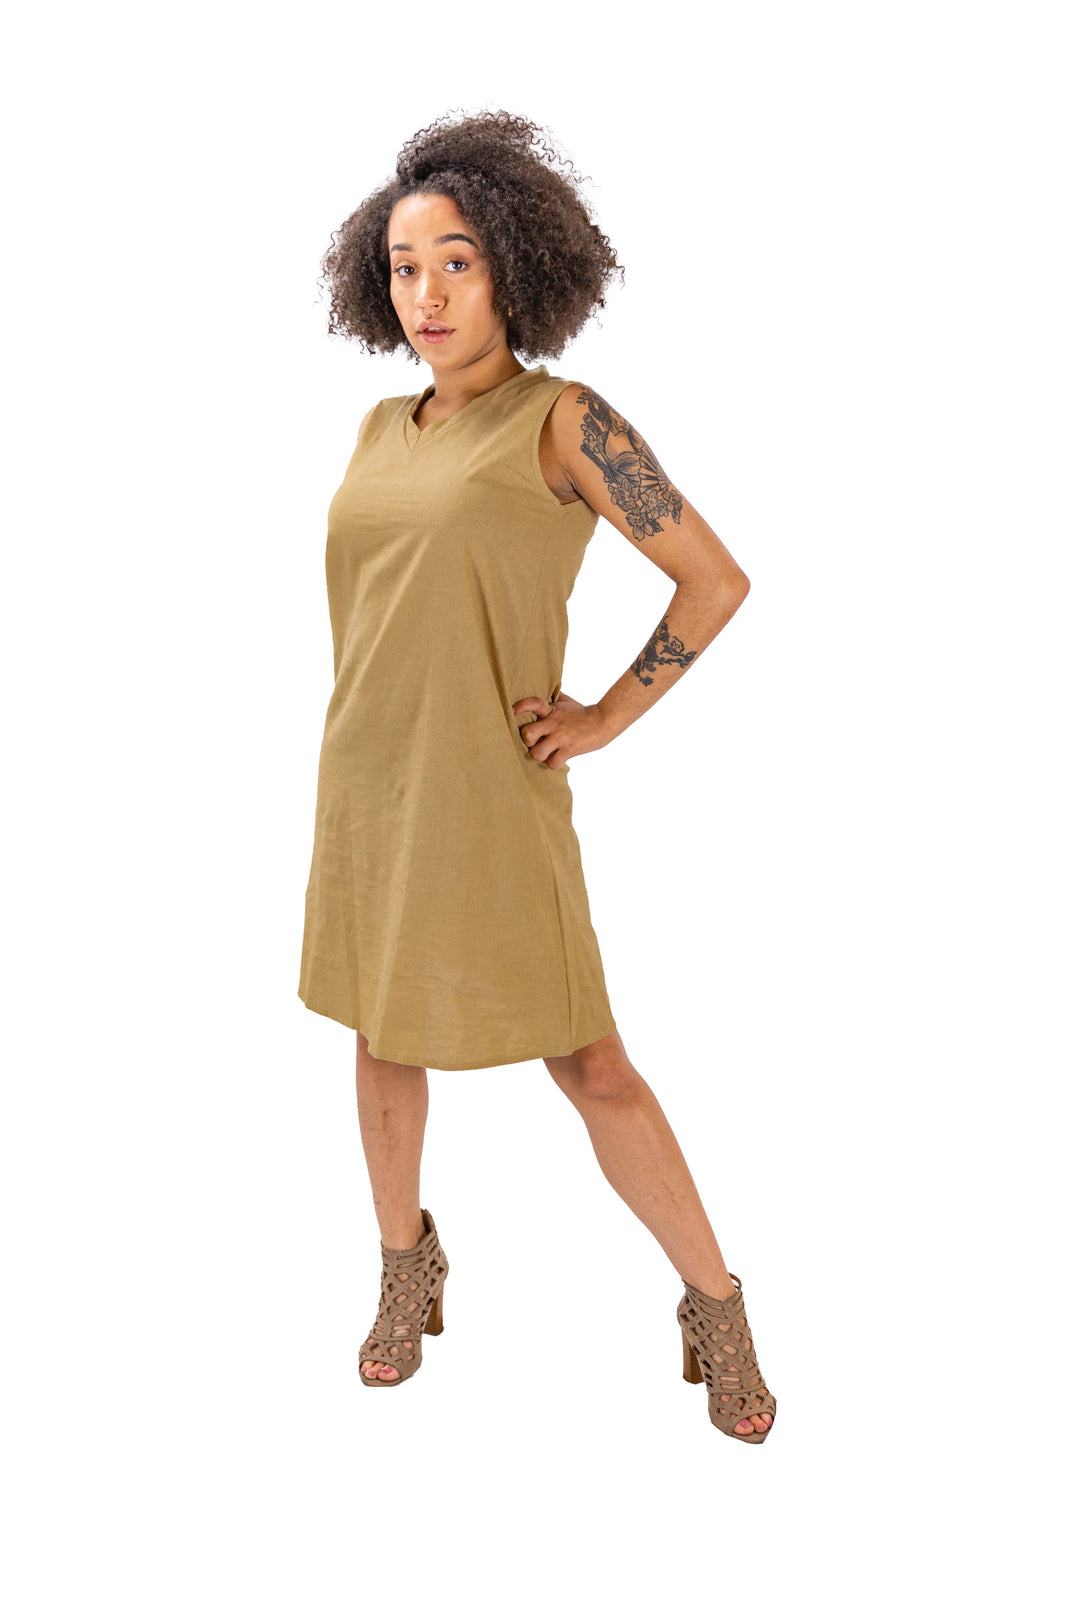 Fabonics Sun-Kissed Earthy Tunic Dress in Casual Brown, Perfect for Versatile Wear